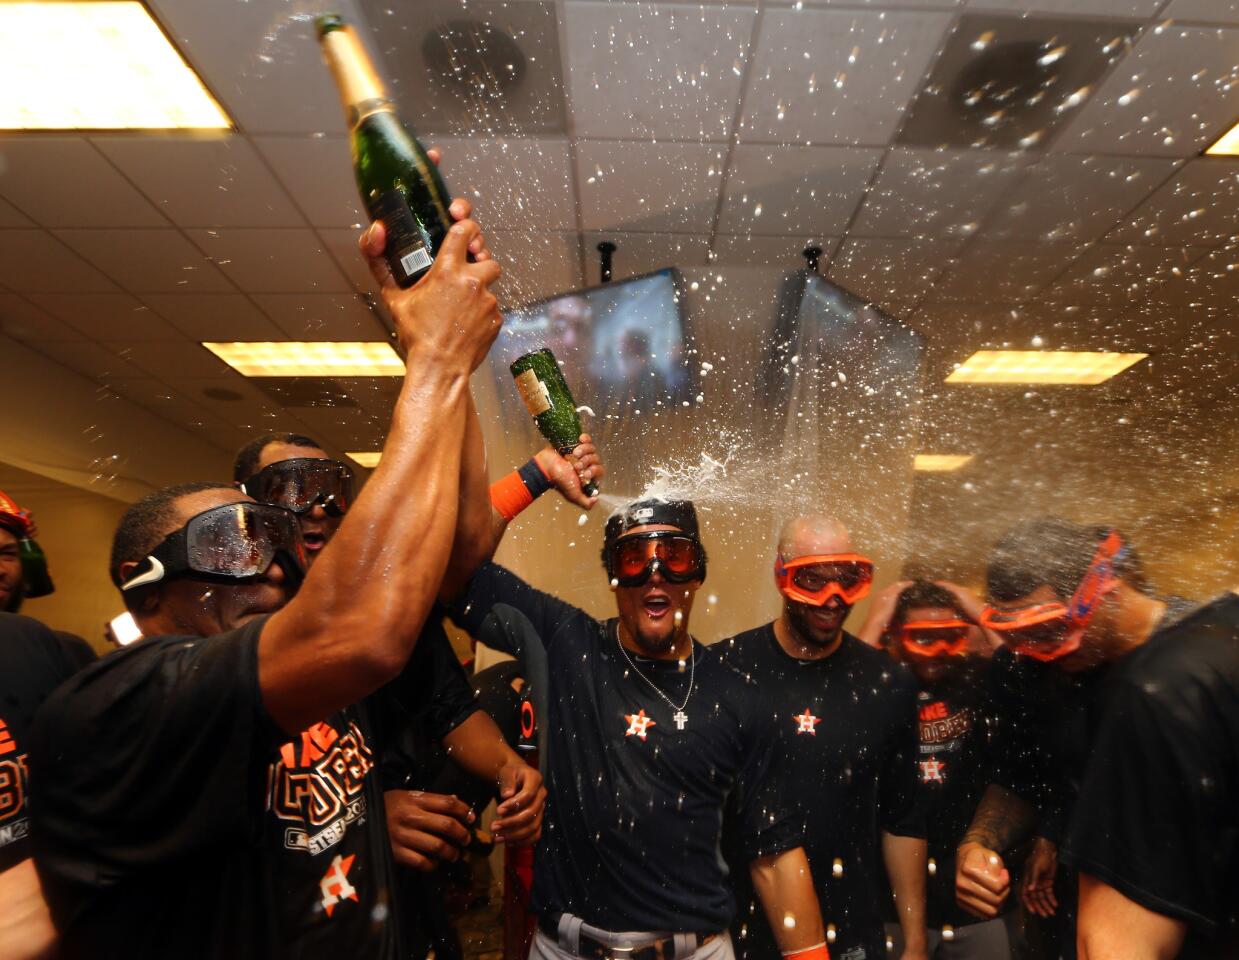 NEW YORK, NY - OCTOBER 06: The Houston Astros celebrate in their locker room after defeating the New York Yankees in the American League Wild Card Game at Yankee Stadium on October 6, 2015 in New York City. The Astros defeated the Yankees with a score of 3 to 0. (Photo by Elsa/Getty Images) ** OUTS - ELSENT, FPG, CM - OUTS * NM, PH, VA if sourced by CT, LA or MoD **